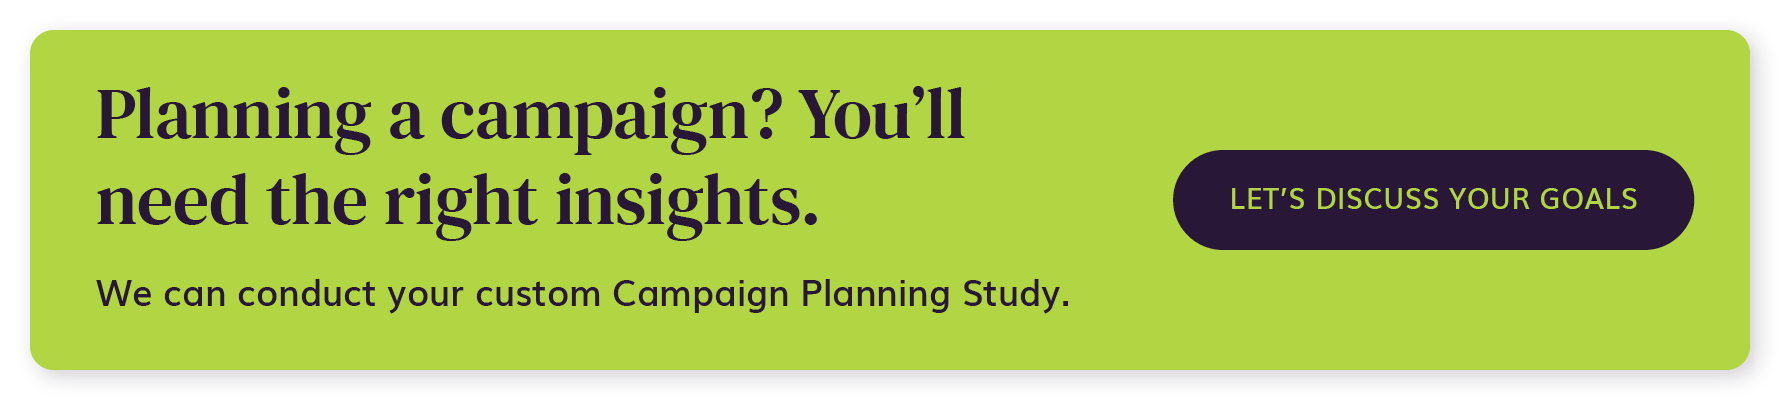 Let Graham-Pelton help with your next campaign planning study.